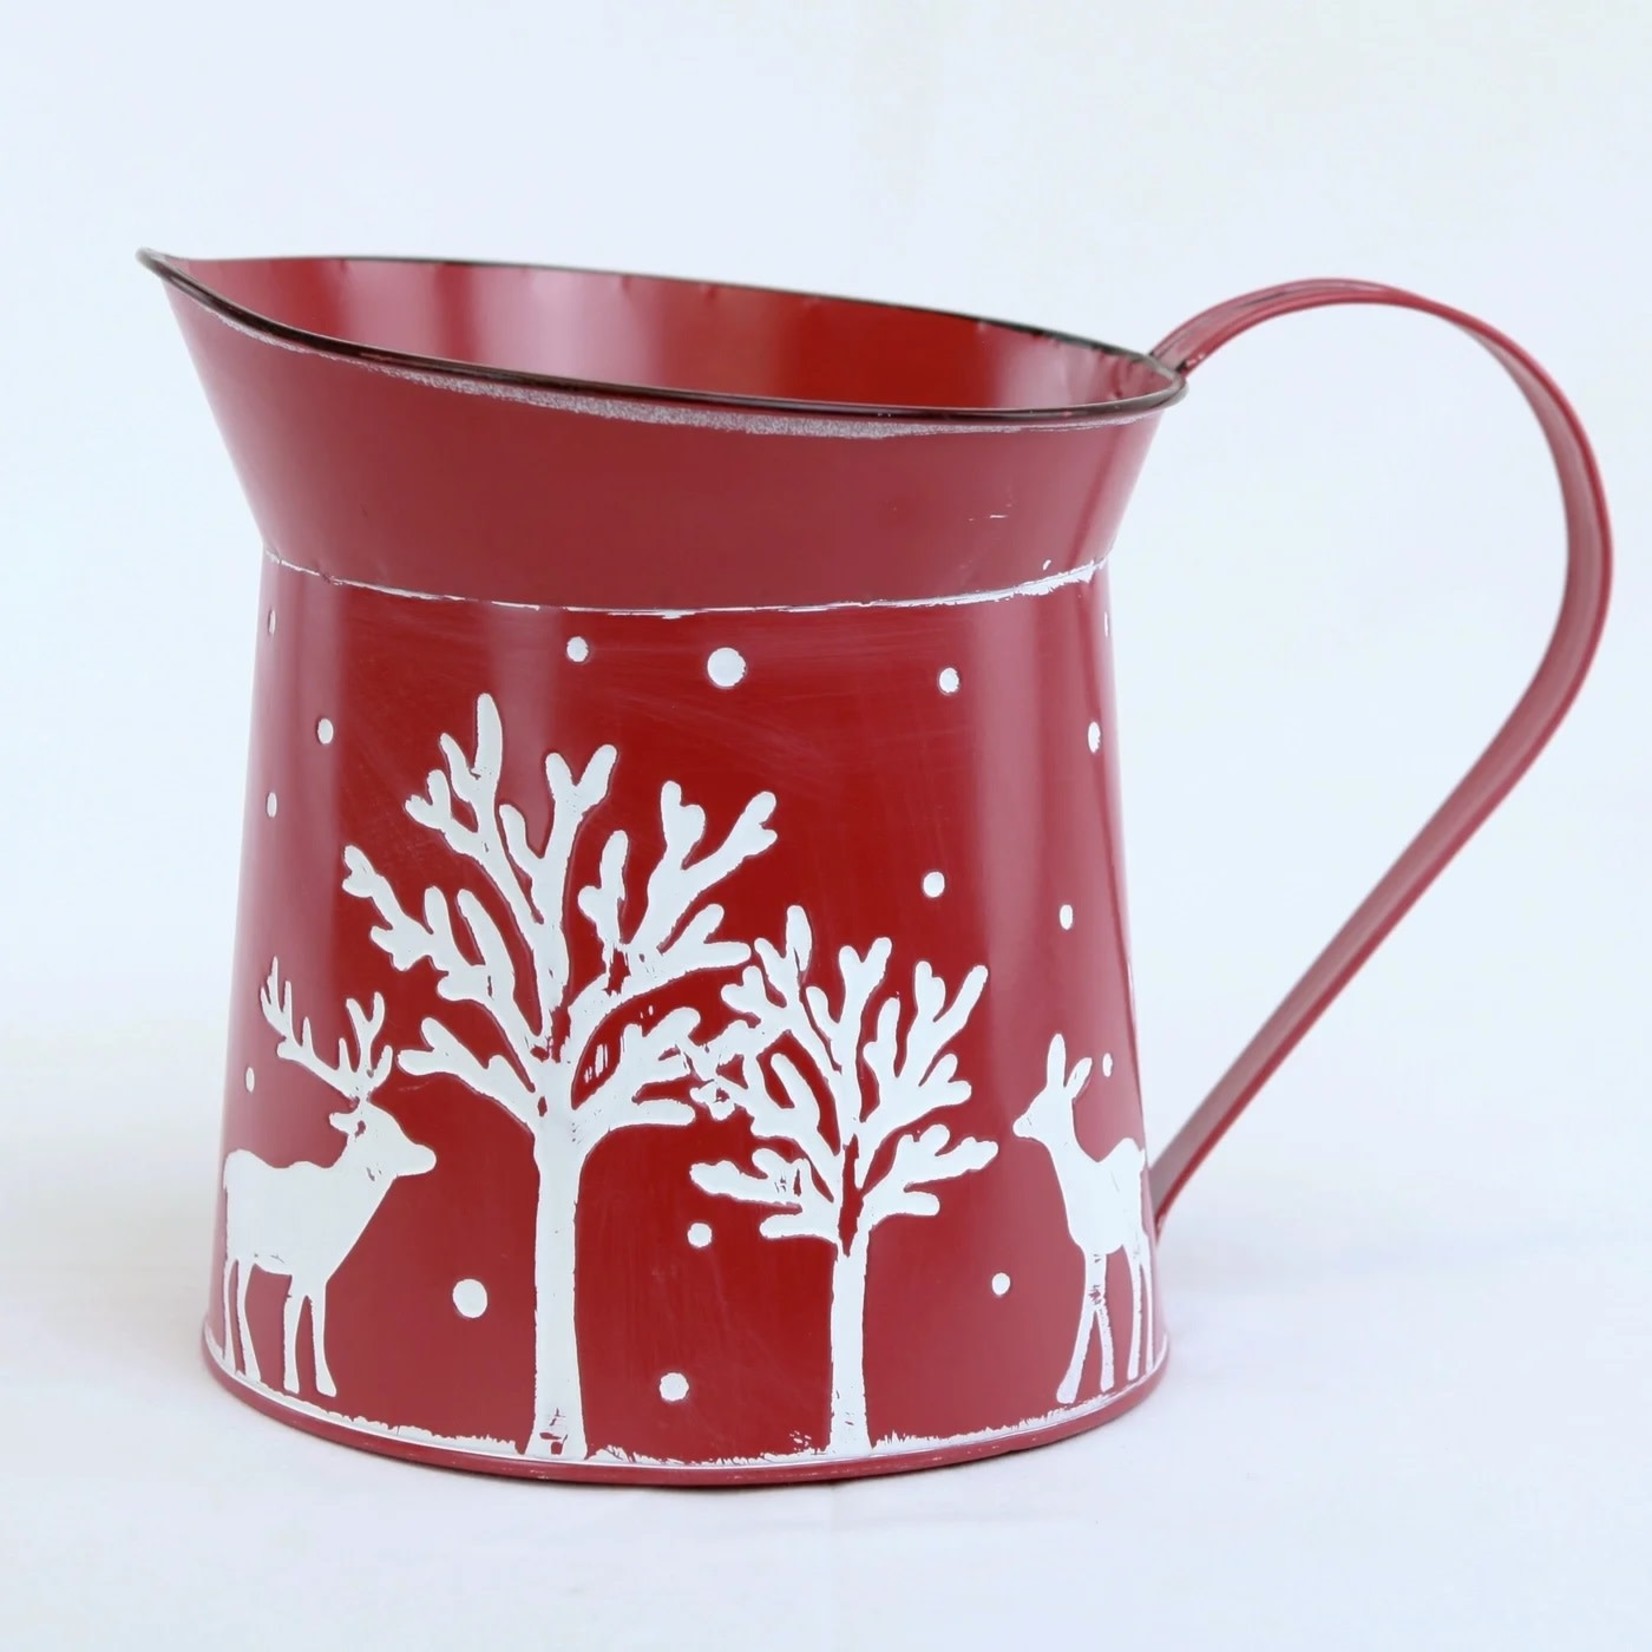 10"/6.8"X7"H/7.5"OH, RED METAL WATERING CAN W/XMAS PATTERN, W/H. LINER